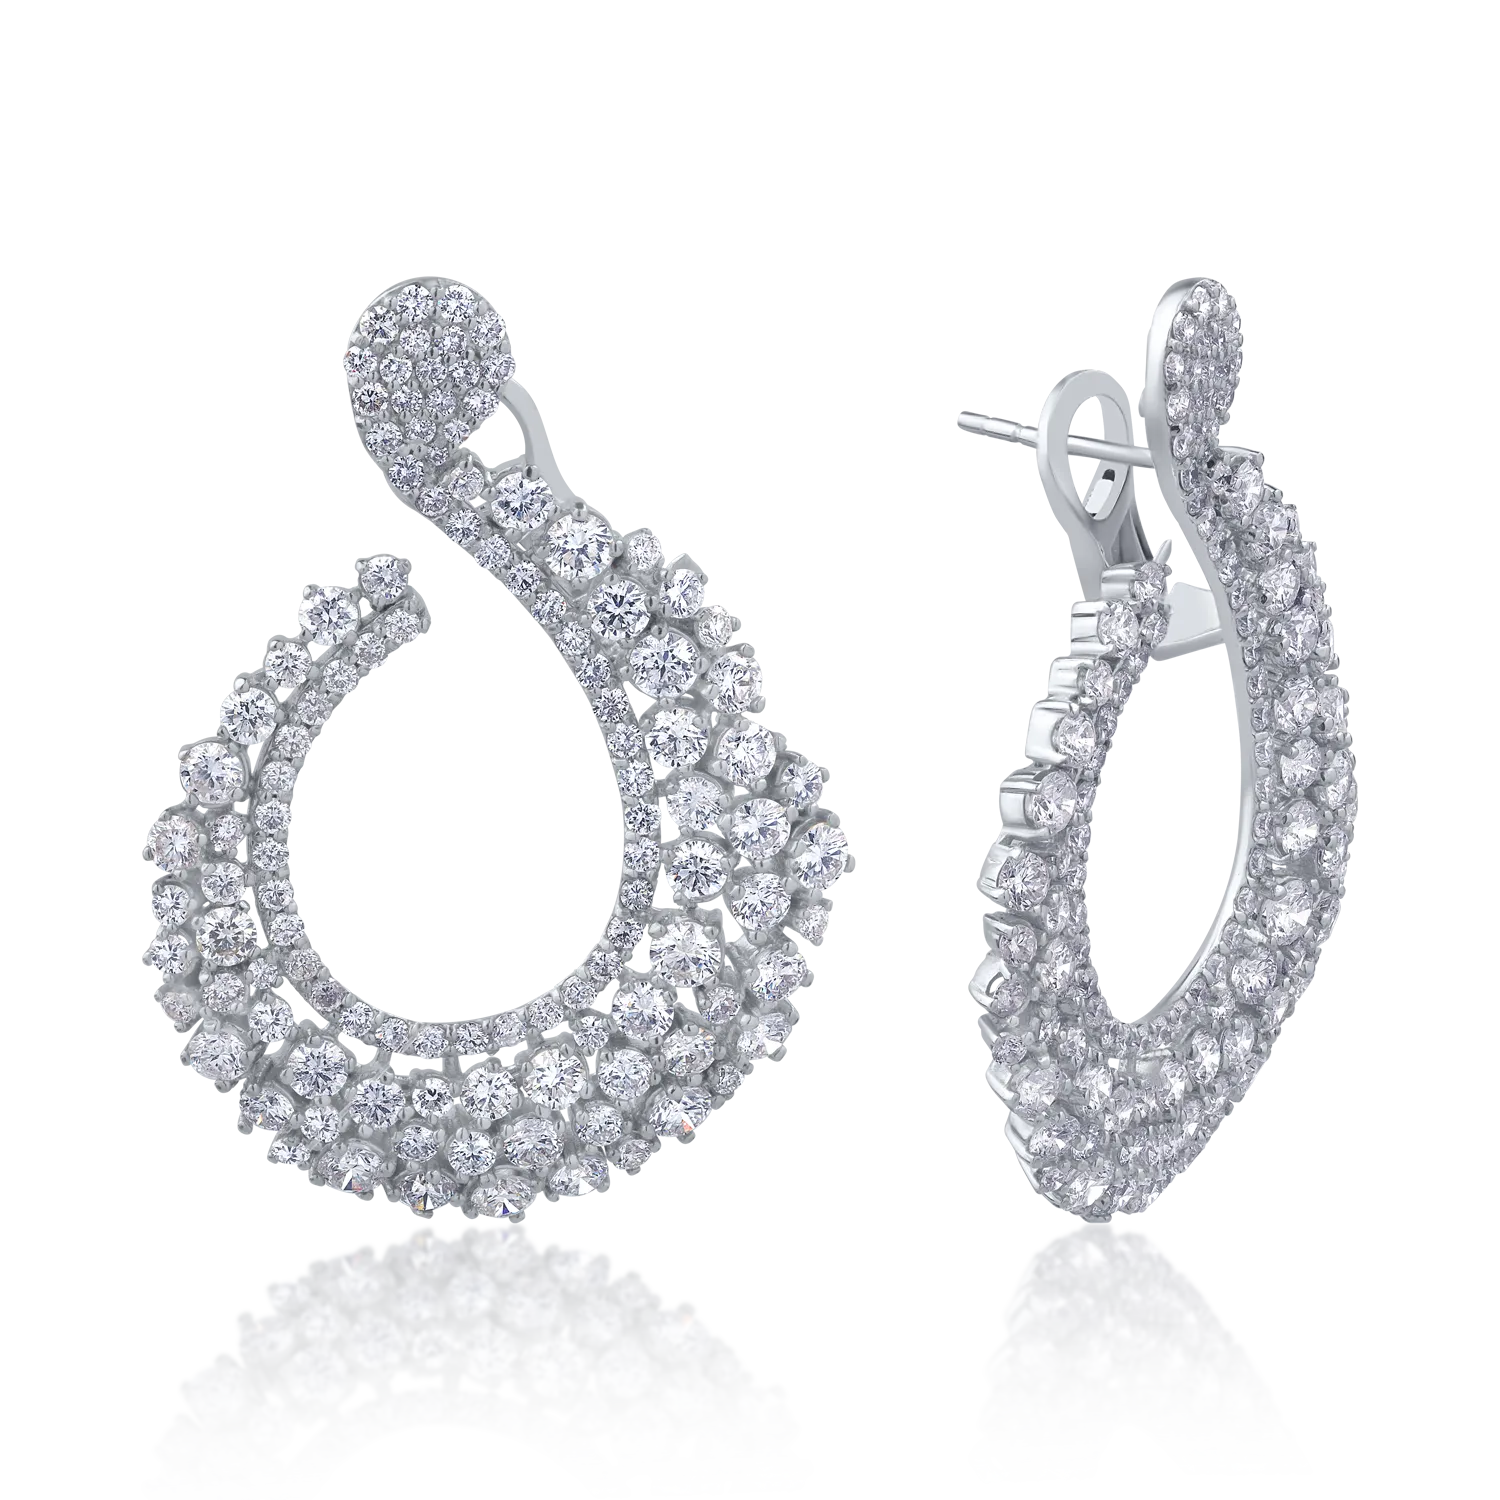 18K white gold earrings with 7.16ct diamonds